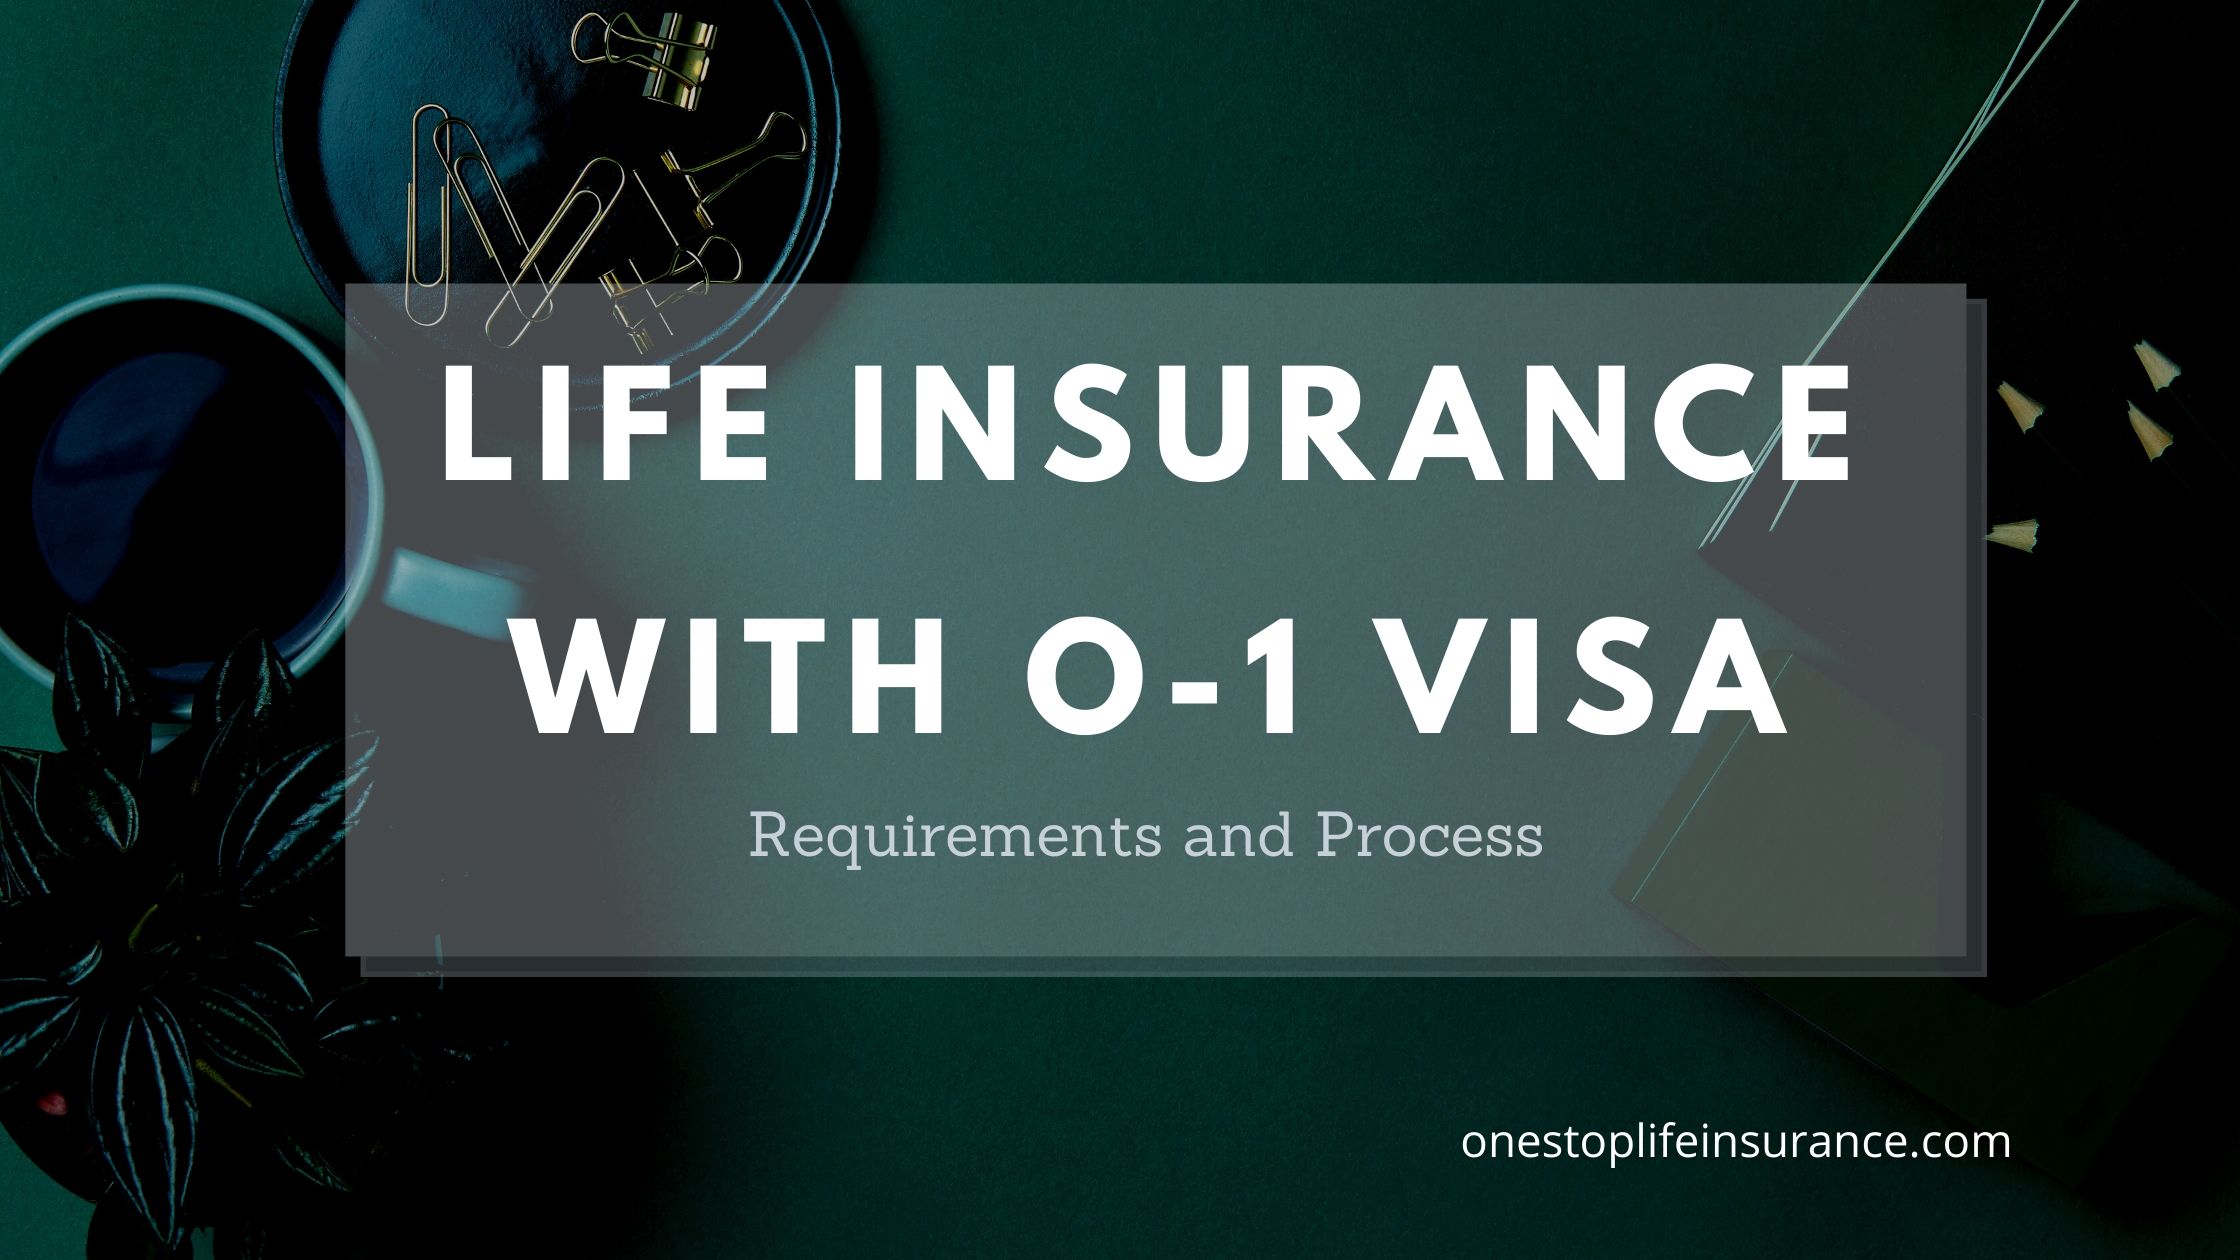 Life insurance with o-1 visa requirements and options